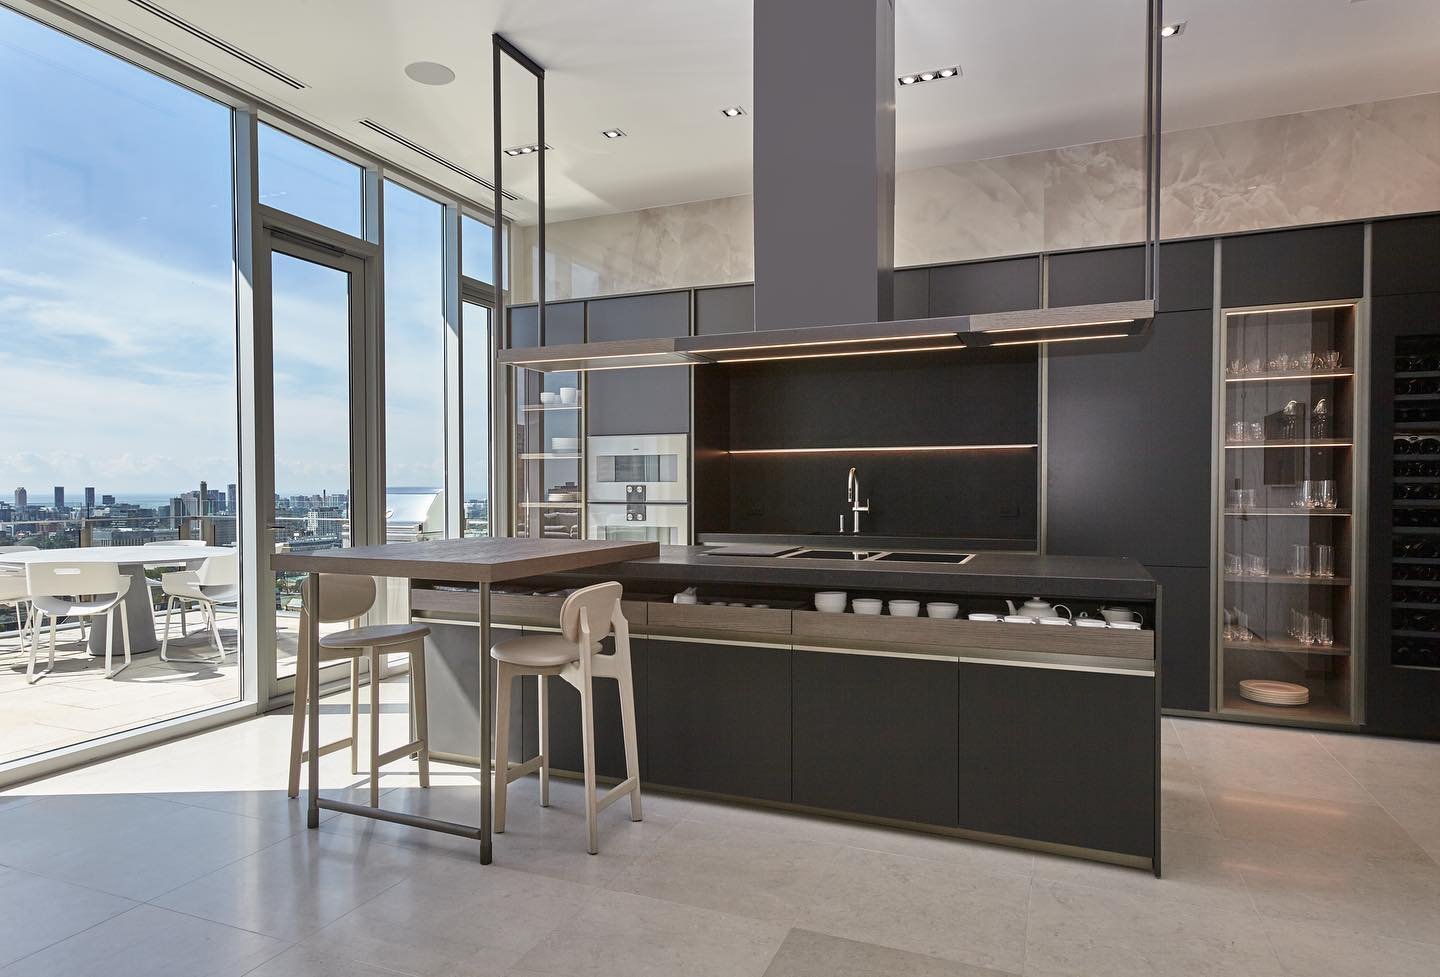 Still swooning over this @molteniandc kitchen at our Cumberland project. #breakfastwithaview 

Designer: @crayondesigninteriors 
📸: @christopher_lawson